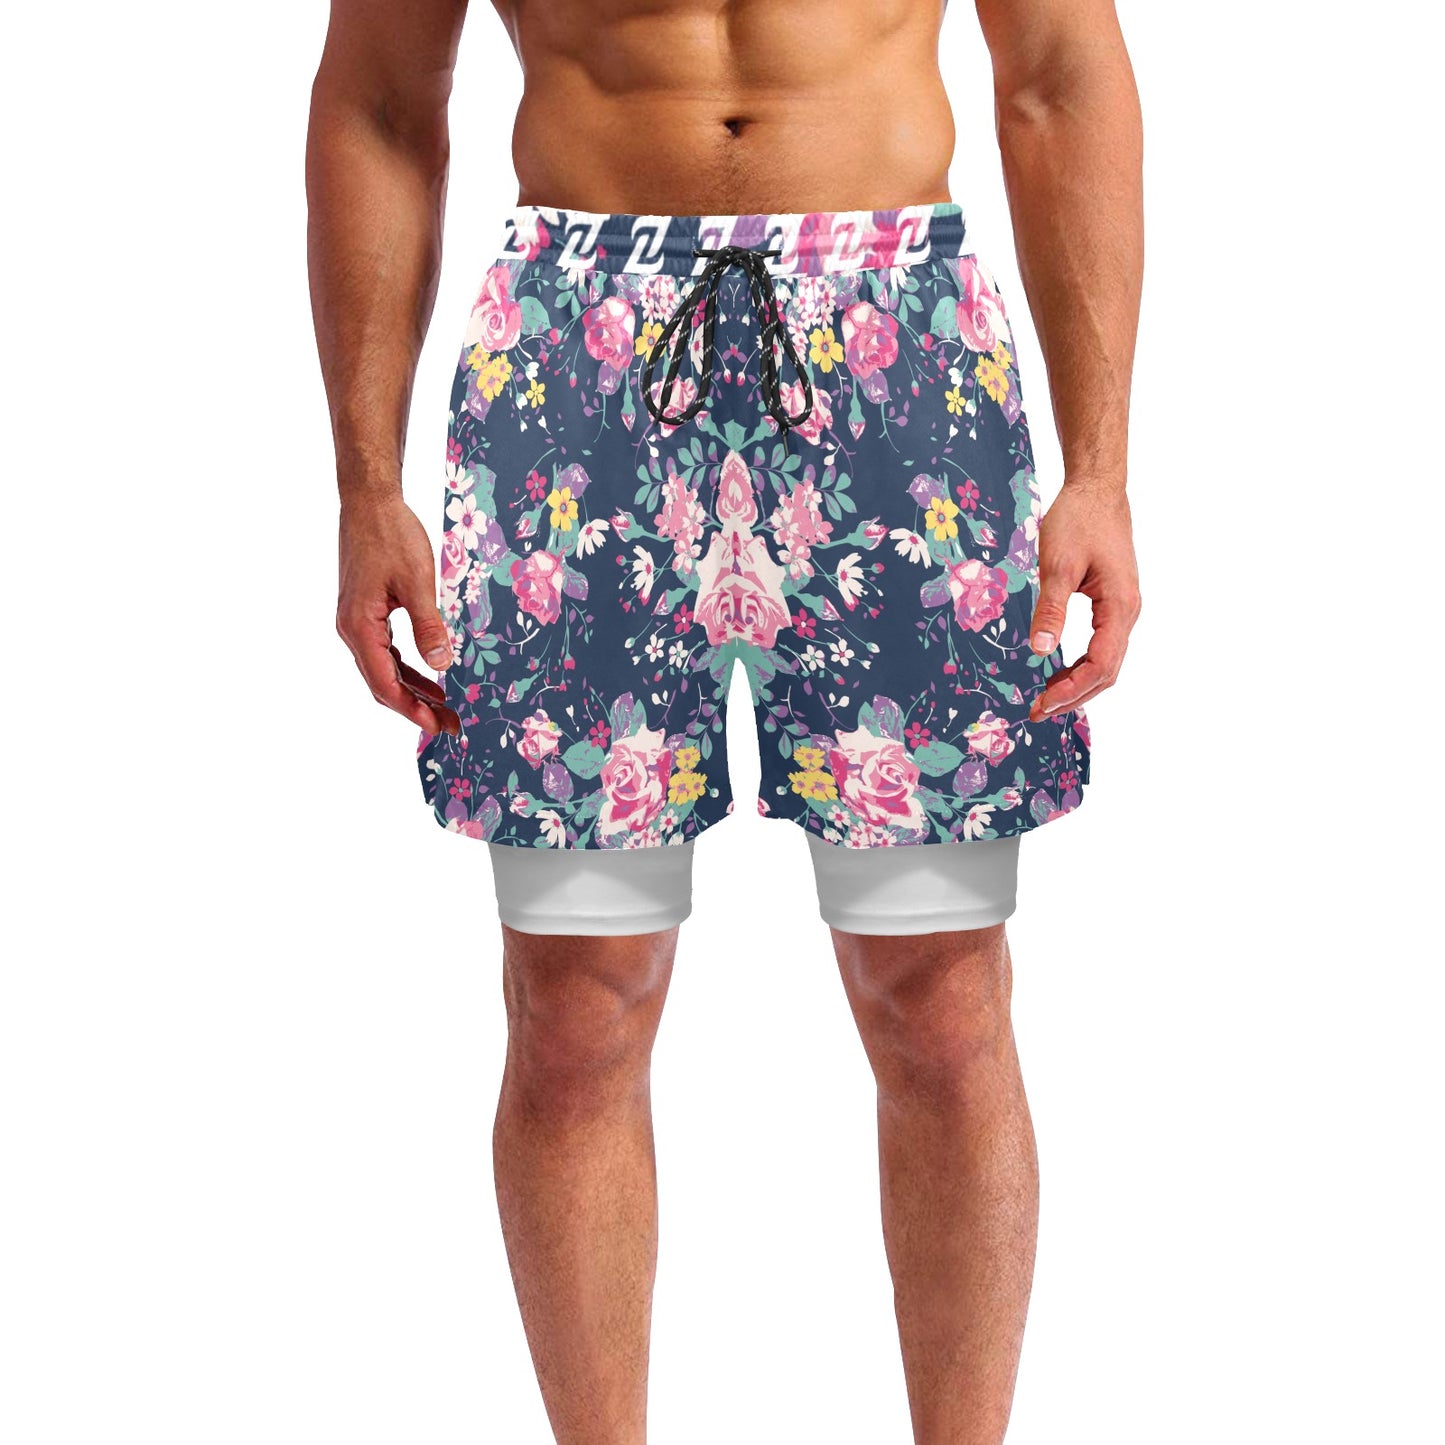 Zen Shorts with Liner - Floral